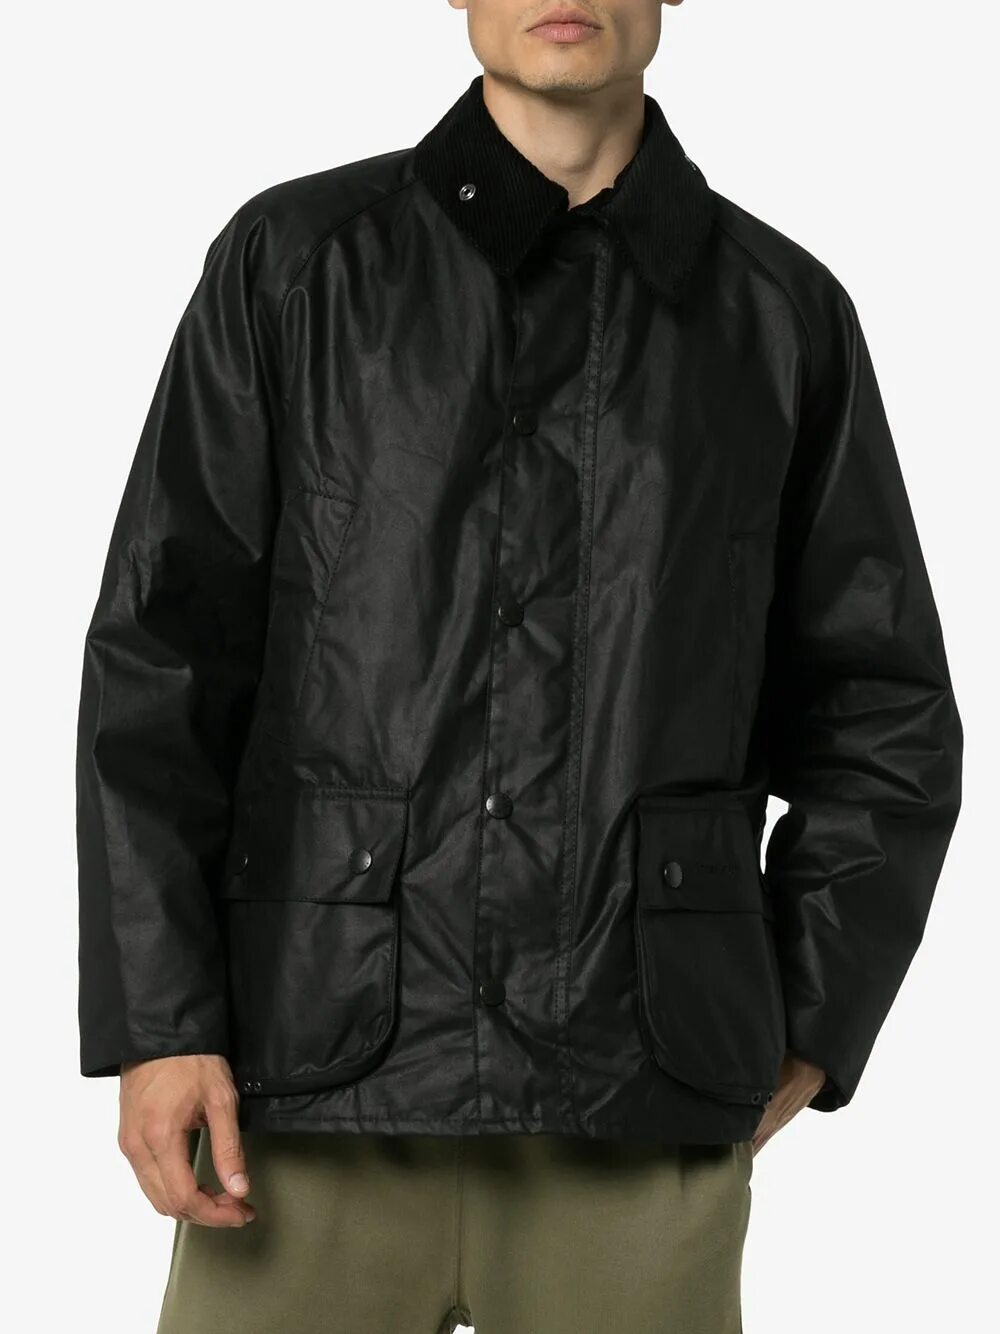 Barbour Ashby Wax Jacket. Barbour вощеная куртка. Barbour куртка Bedale. Barbour вощеная куртка Ashby. Вощеная куртка мужская